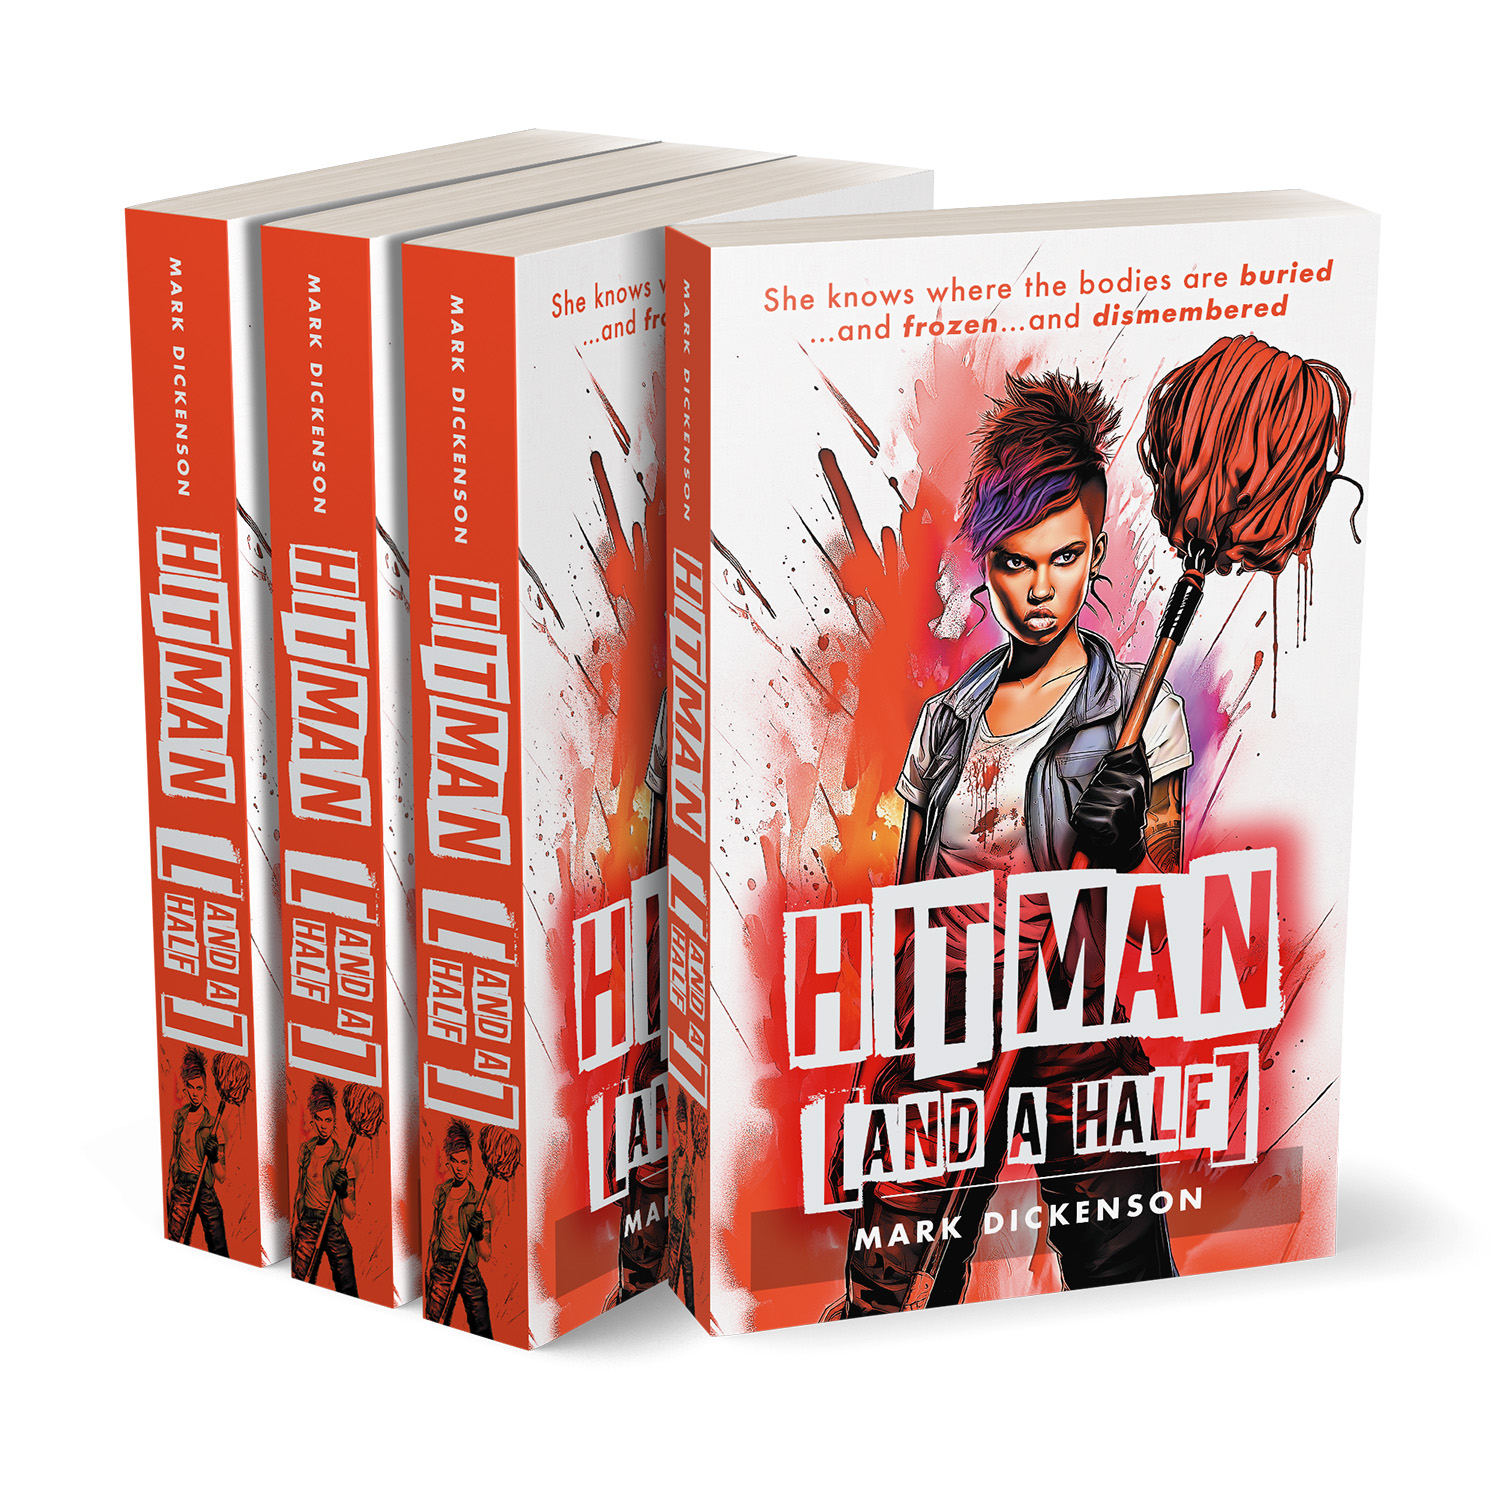 'Hitman [And a Half]' is ripping YA adventure novel by Mark Dickenson. The book cover and interior formatting were designed by Mark Thomas of coverness.com. To find out more about my book design services, please visit www.coverness.com